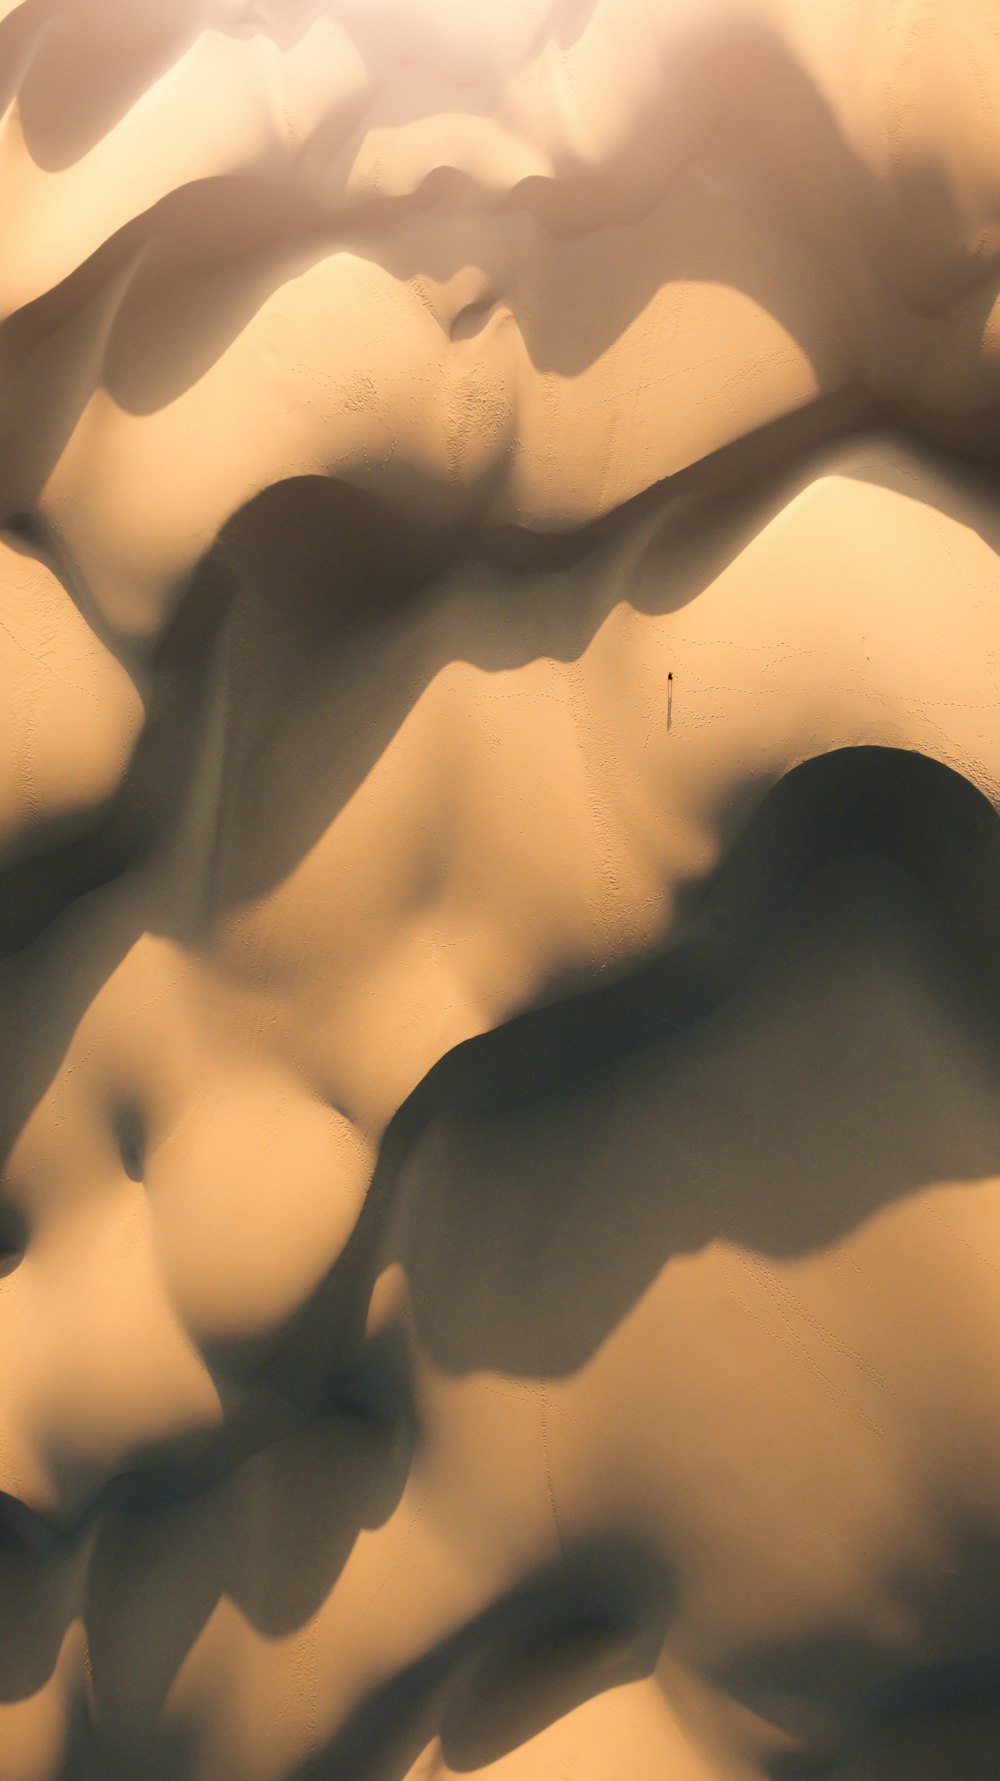 a view of a desert with sand dunes